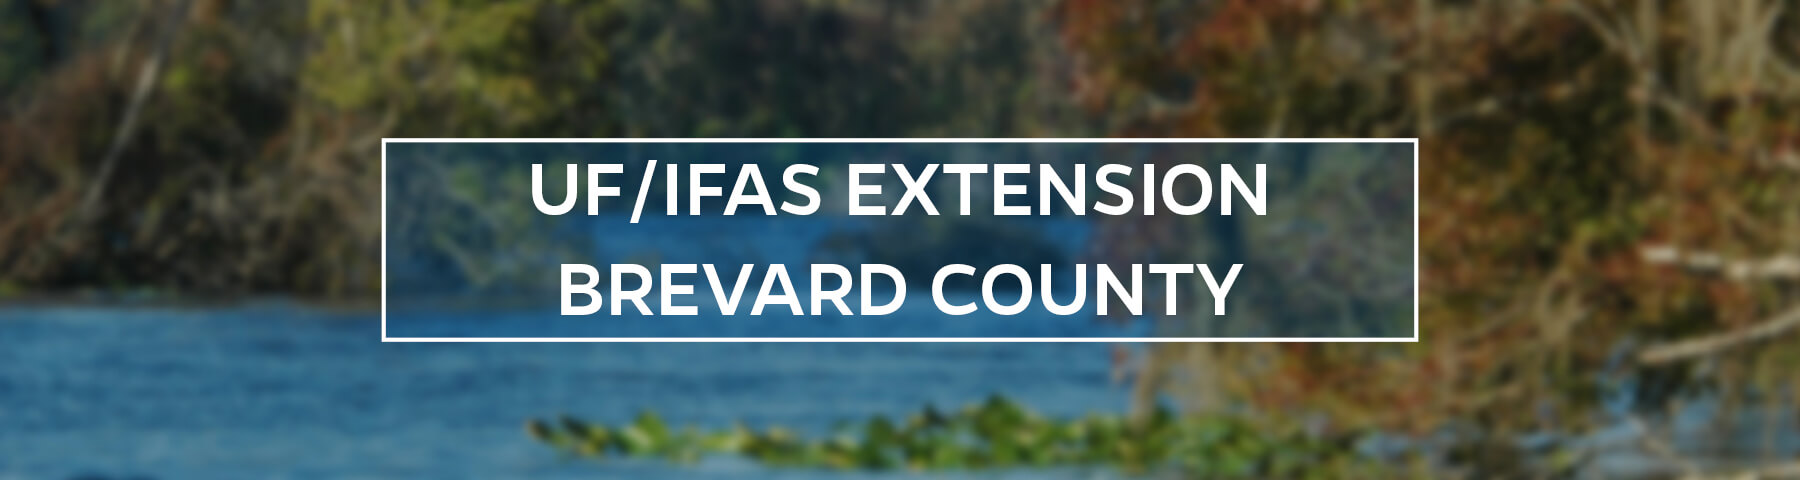 UF/IFAS Extension Brevard County